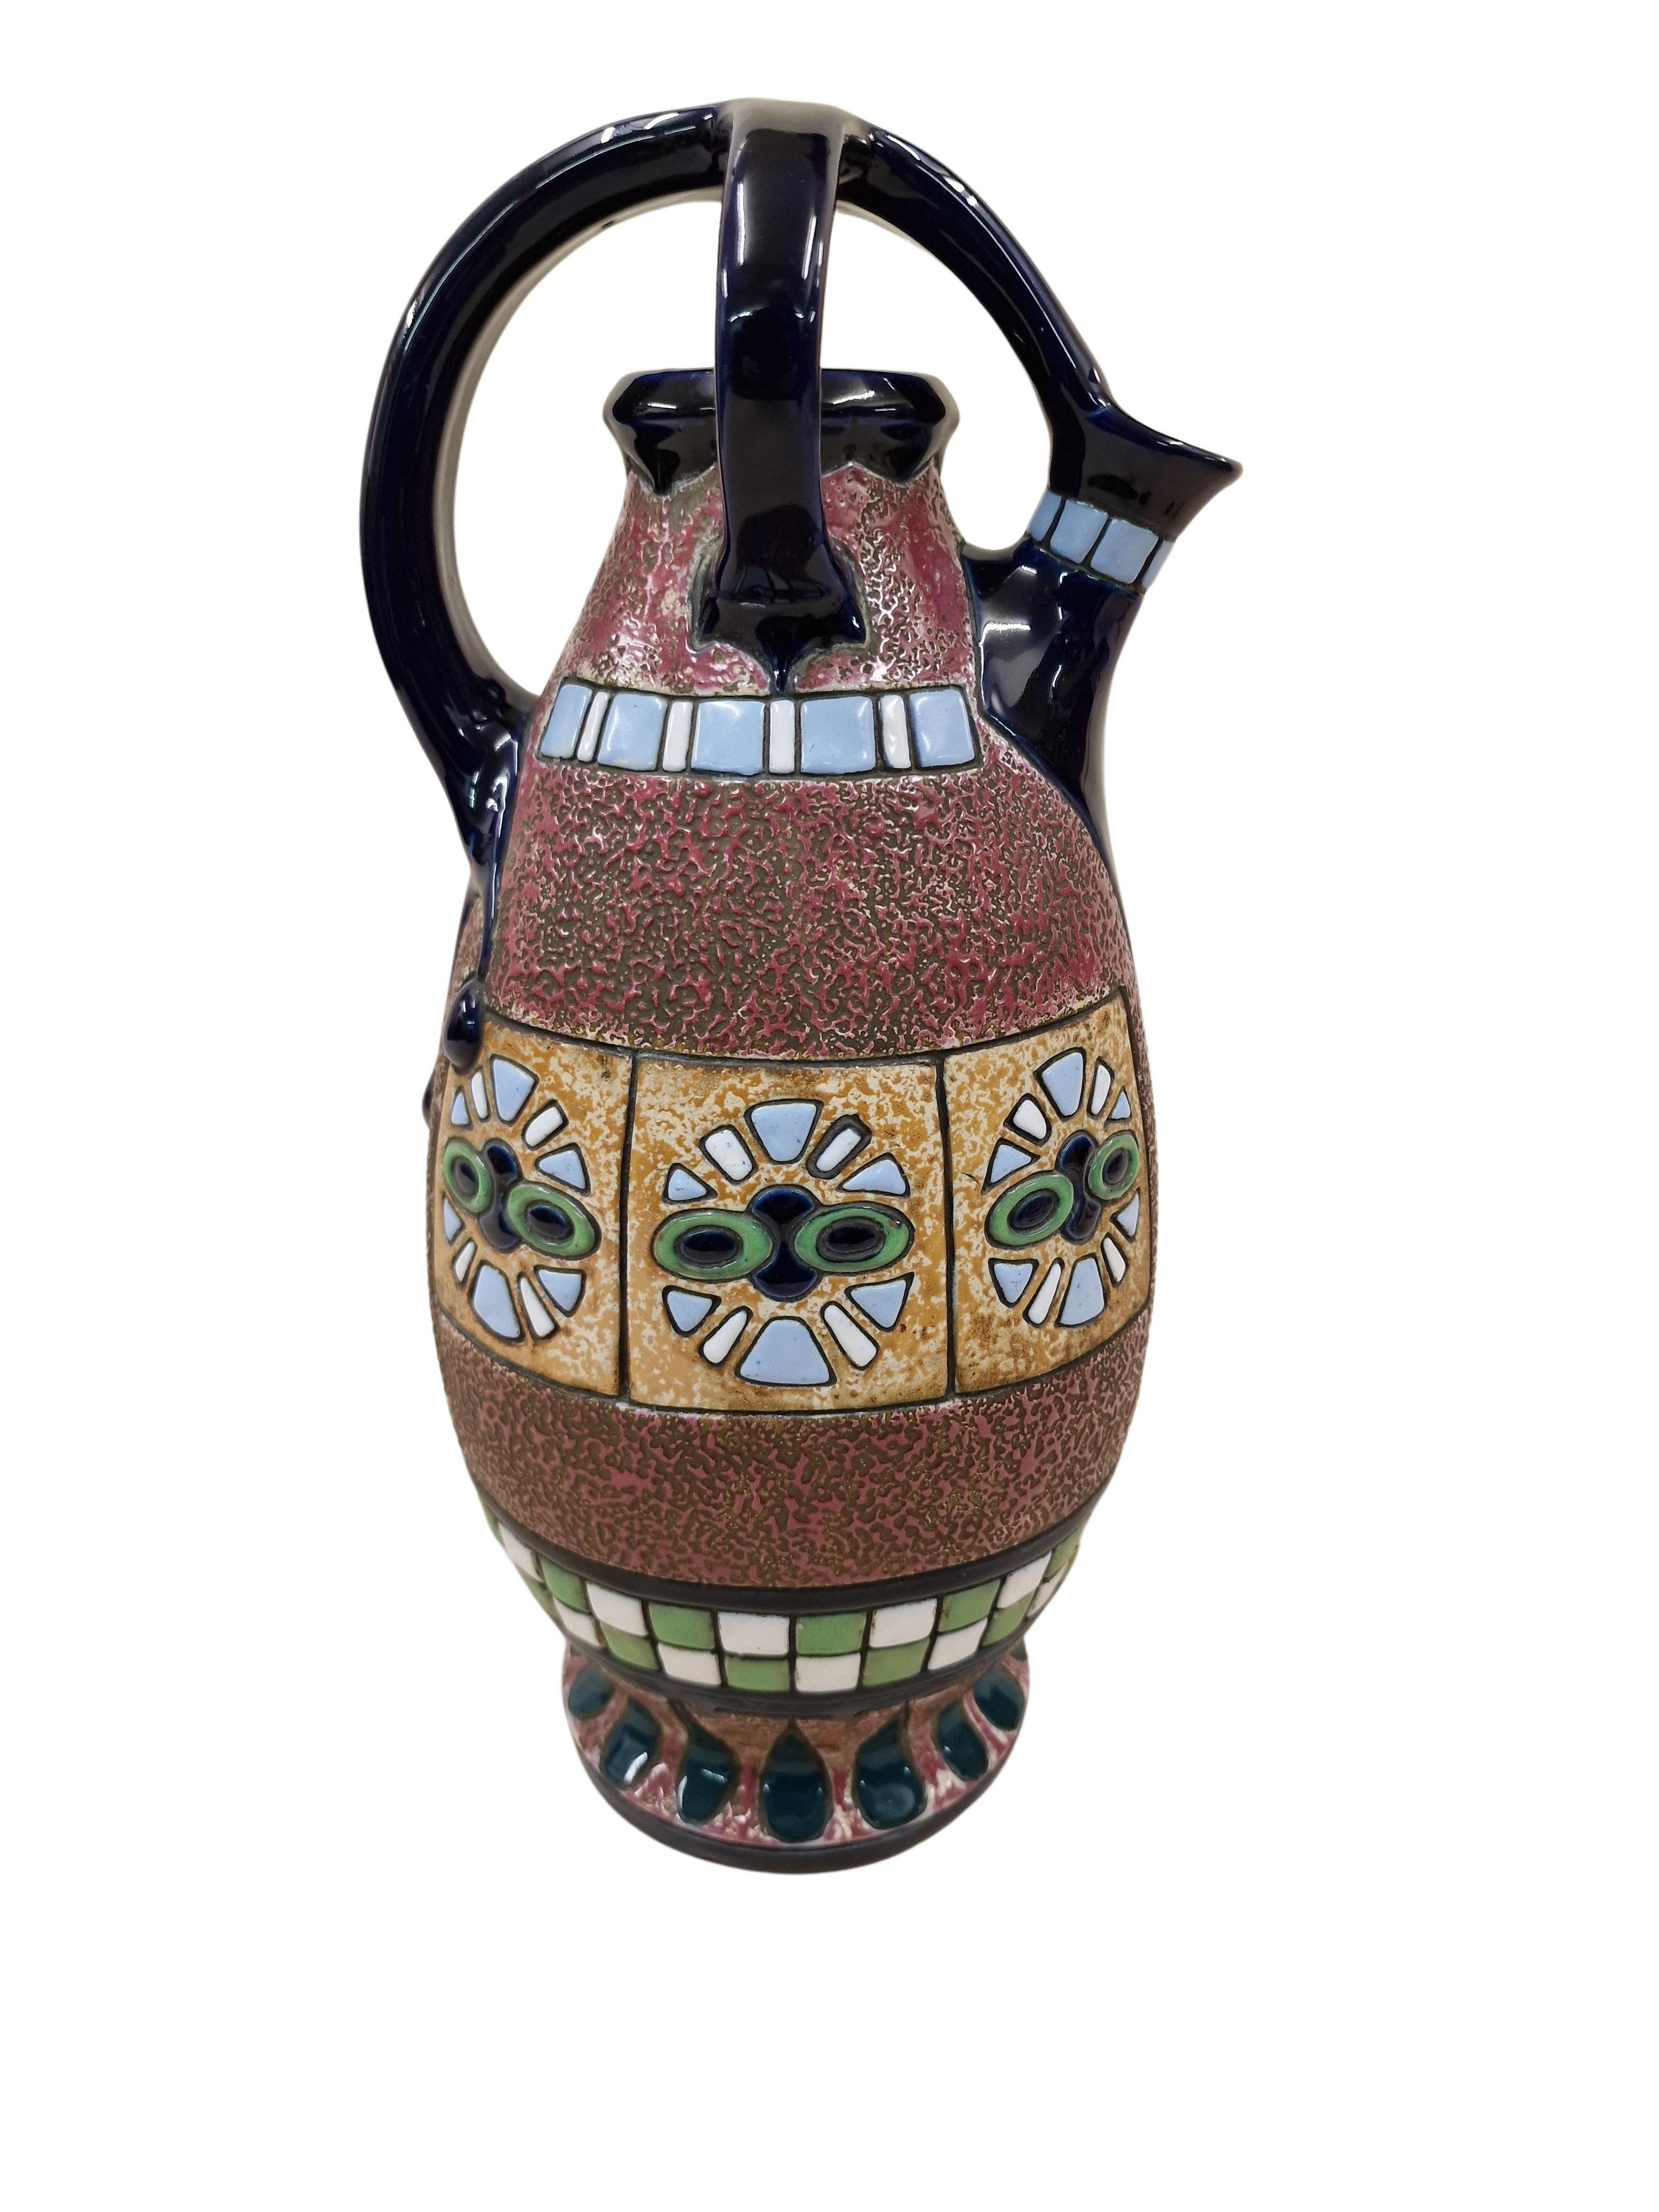 Very impressive jug from the Art Deco period, made around 1915 by the Amphora company from the Czech Republic.

The object can be viewed from several sides. On the main display page you can see an impressively designed horse-drawn carriage including